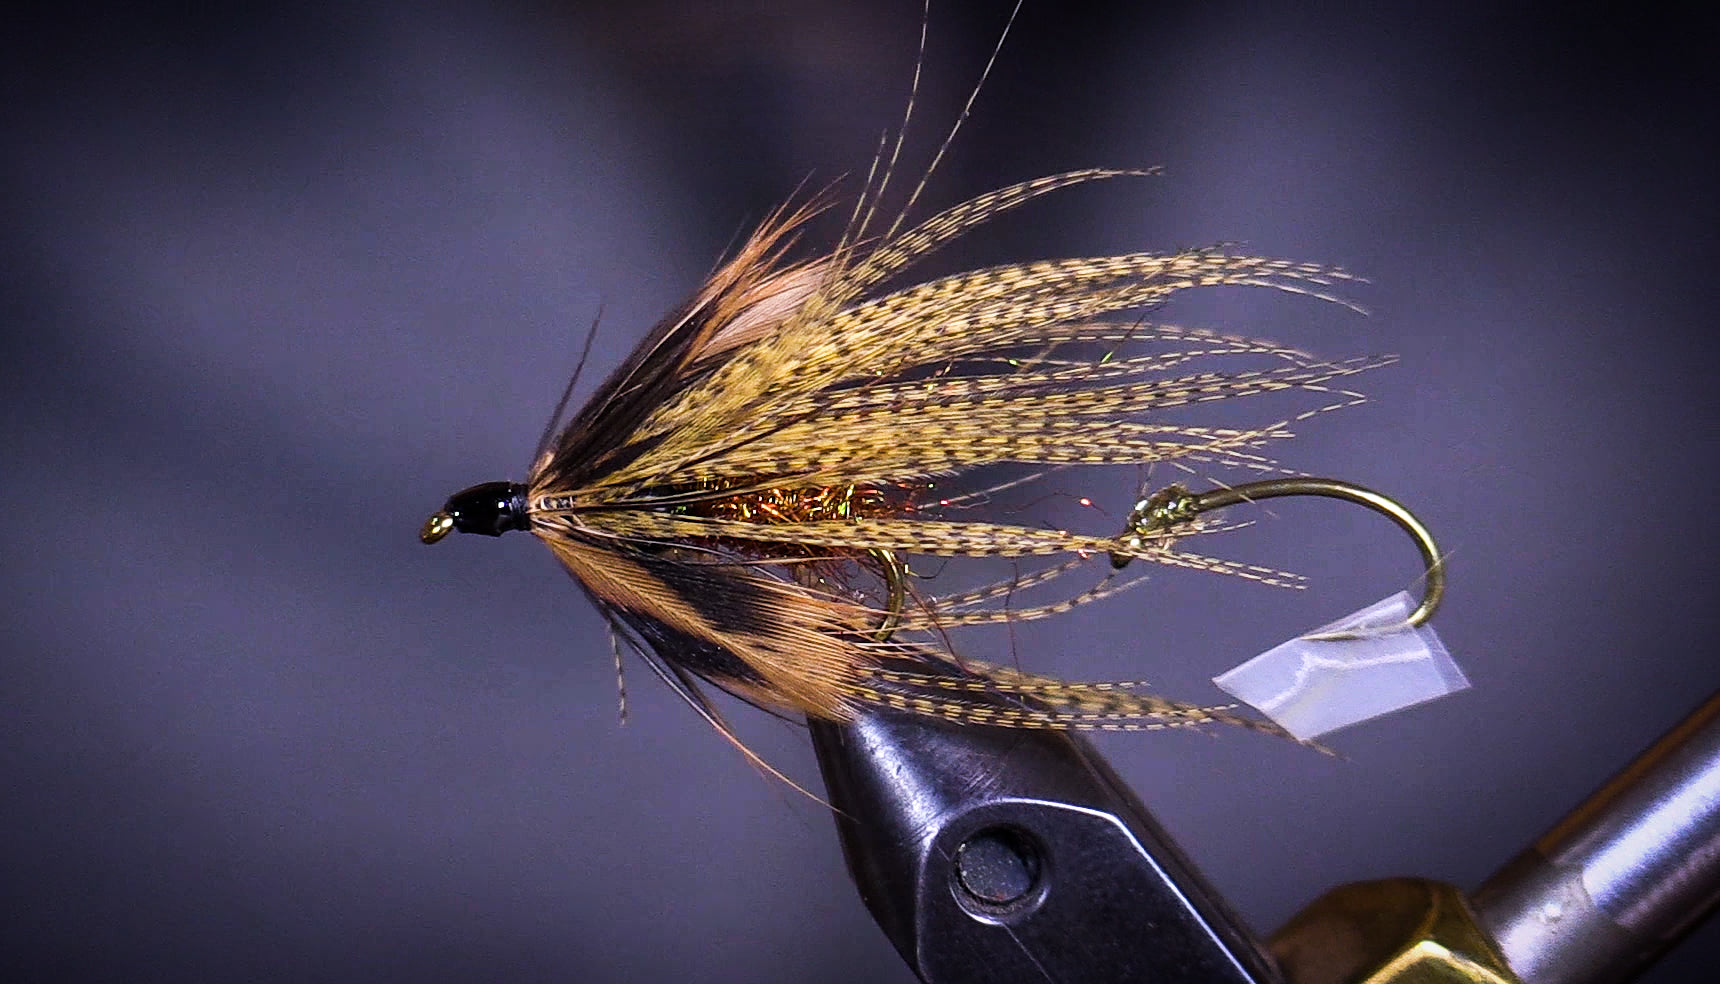 At the Vise | Keith Liddy Ties a Trout Spey Fly